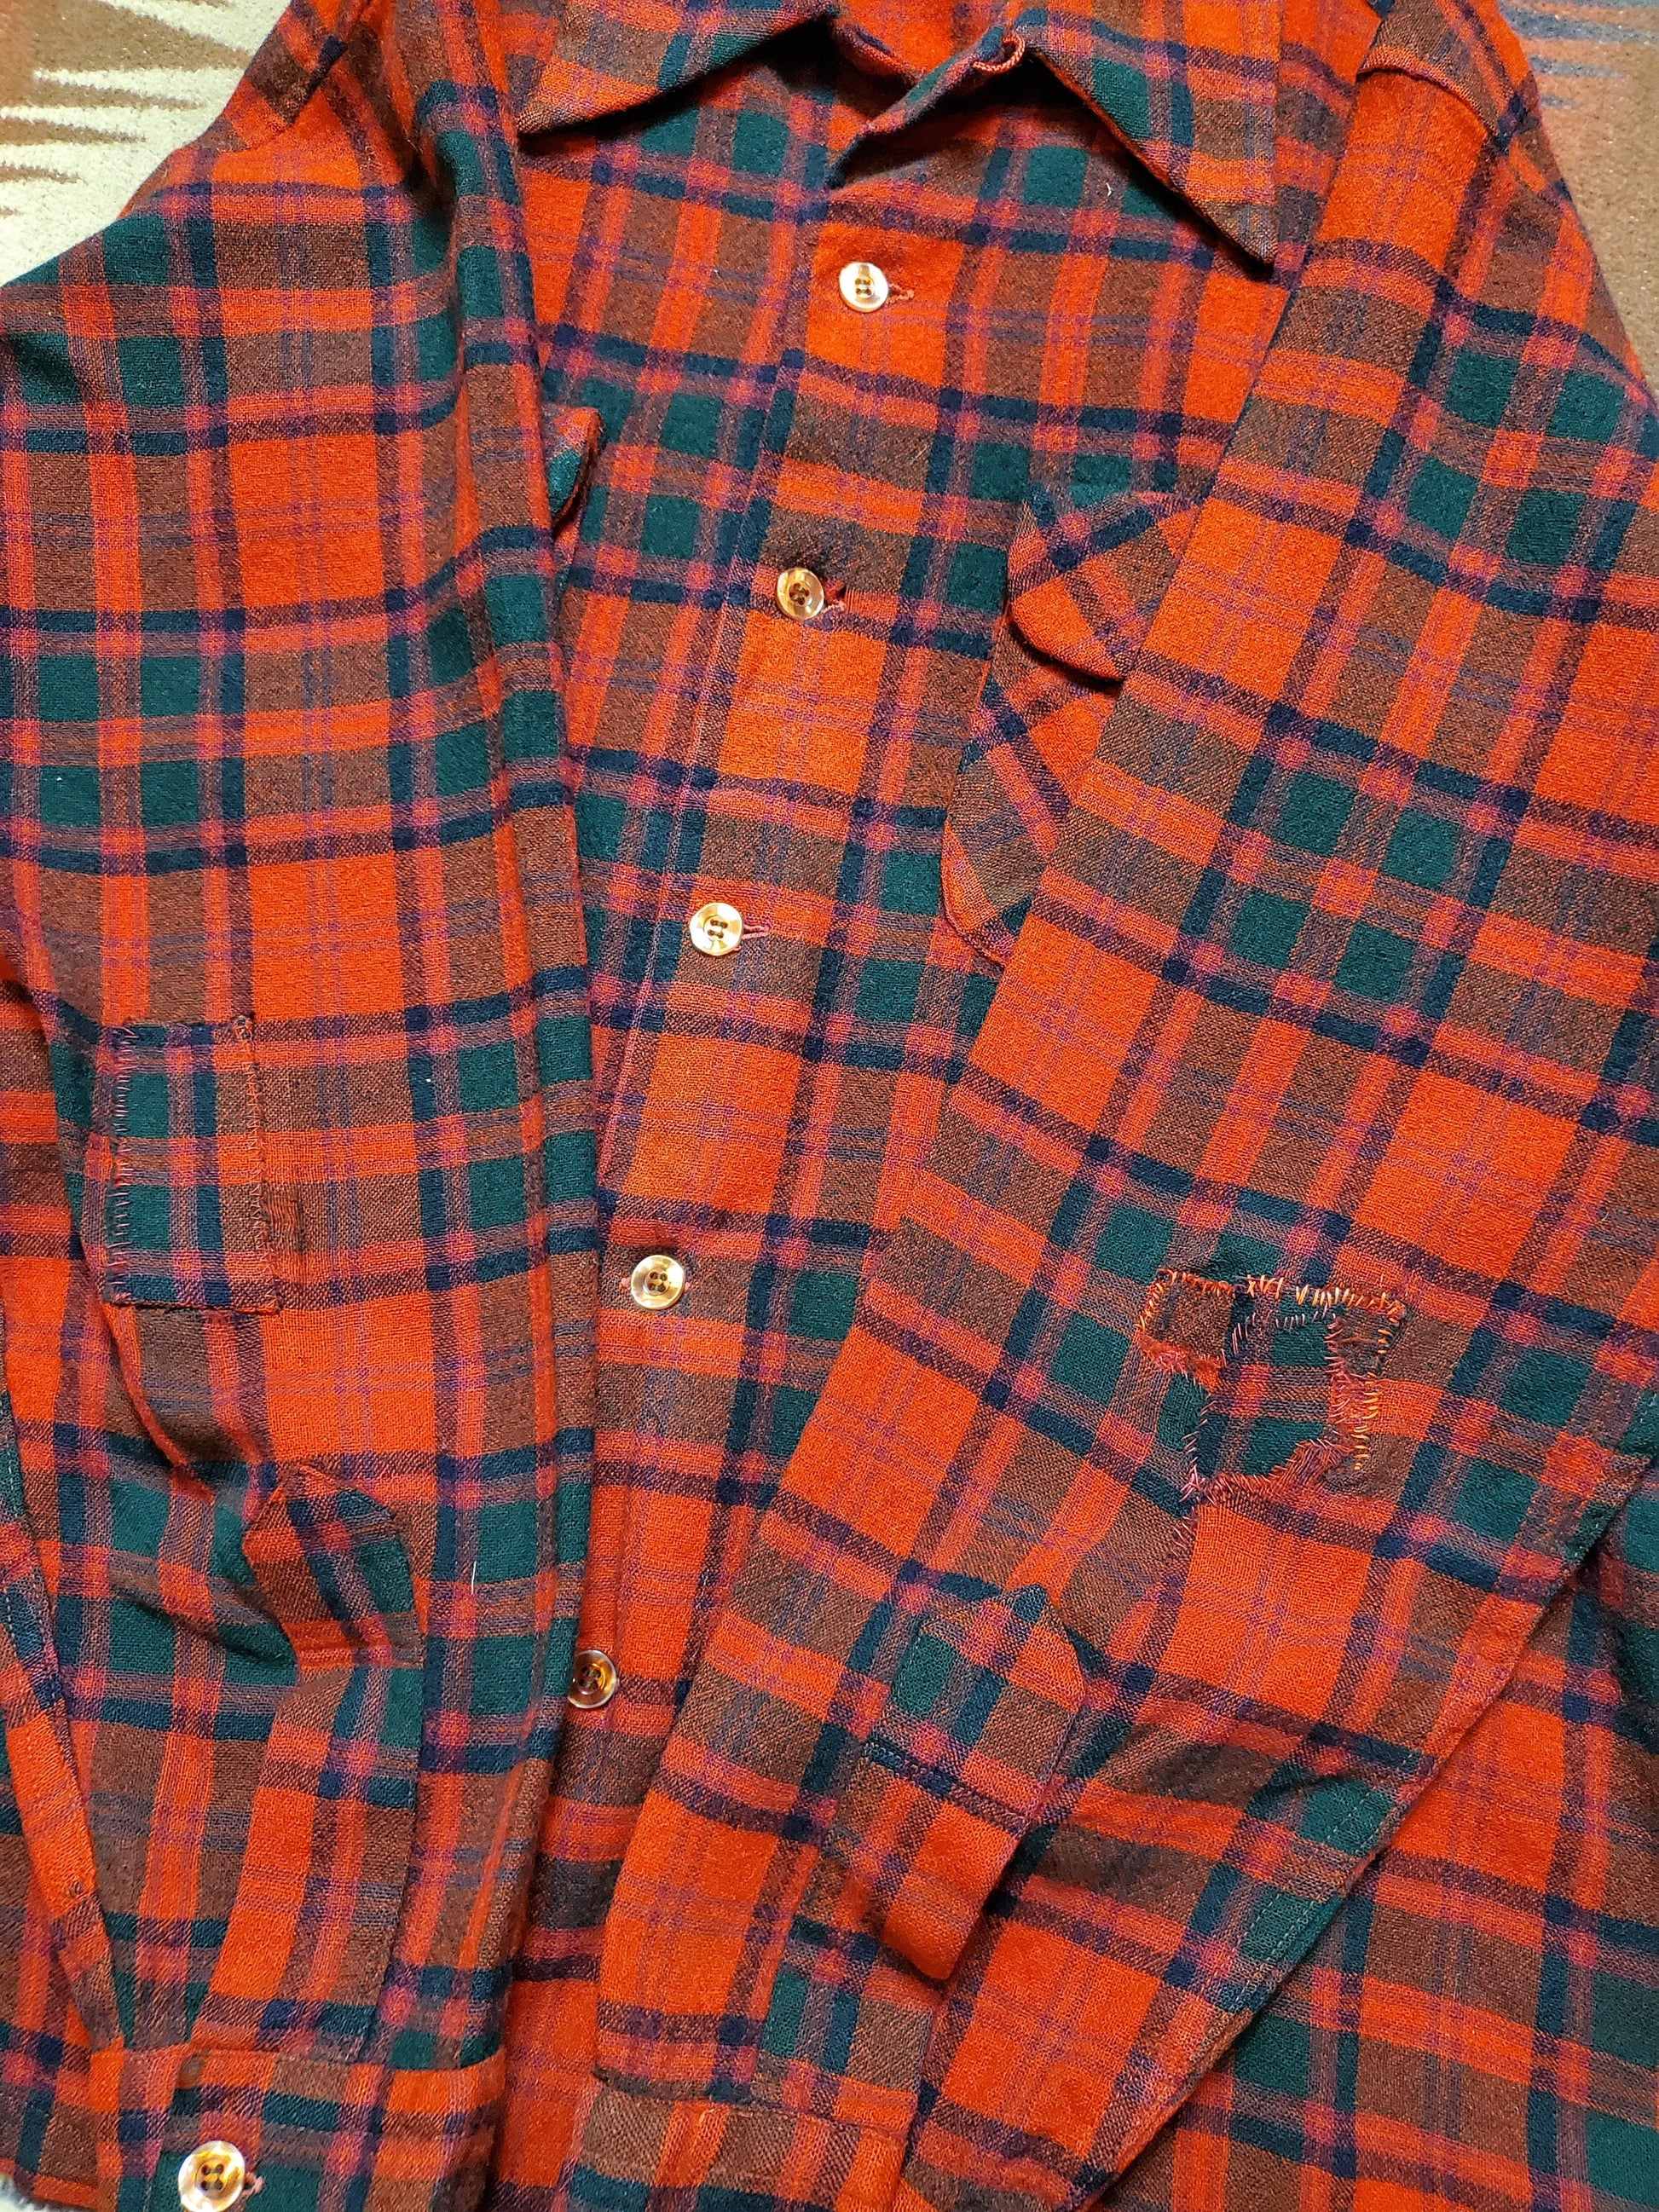 1970s Red Plaid Pendleton Board Shirt Made in USA Size M/L